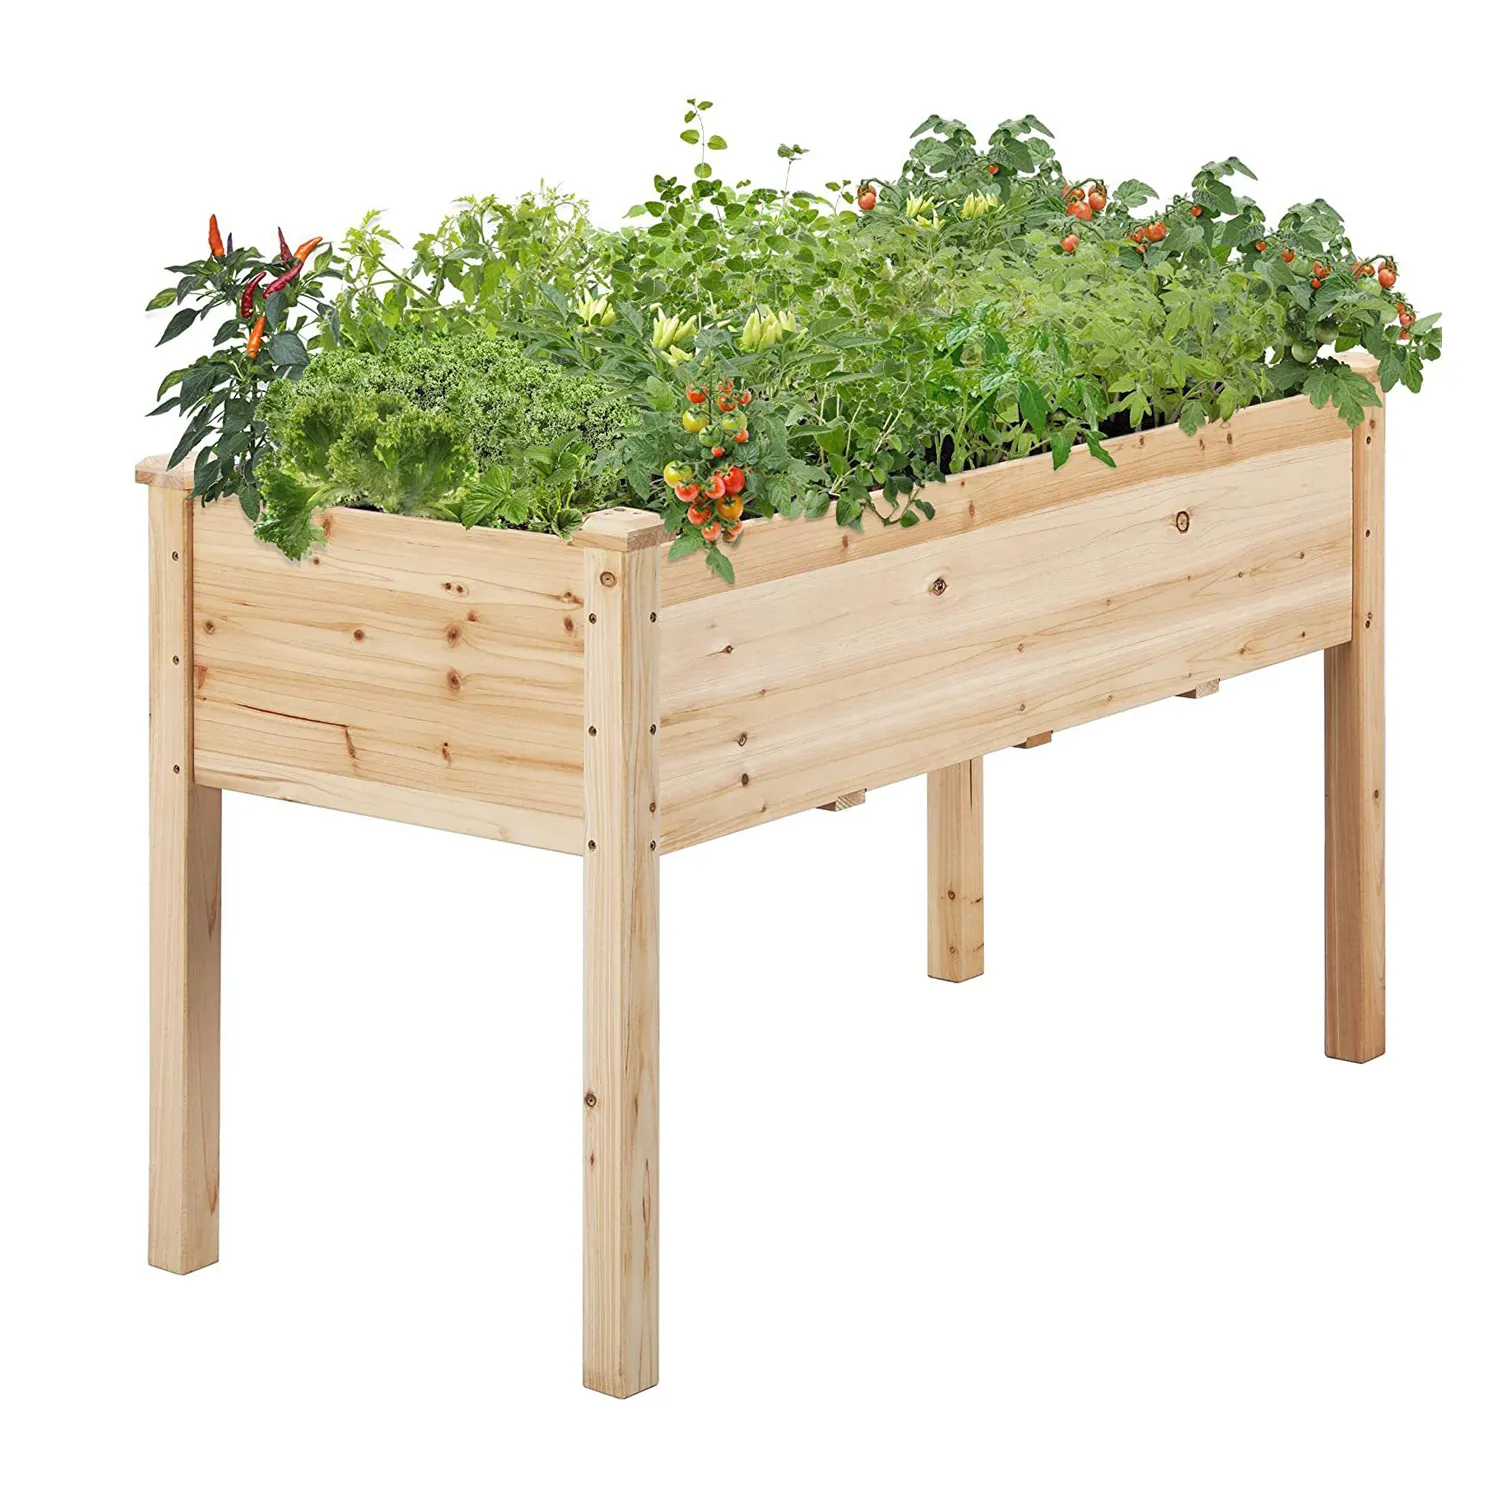 Outdoor Elevated Wood Planter Box with Legs Rectangular Standing Garden Planter Box For Flower, Herb and Vegetable Gardening